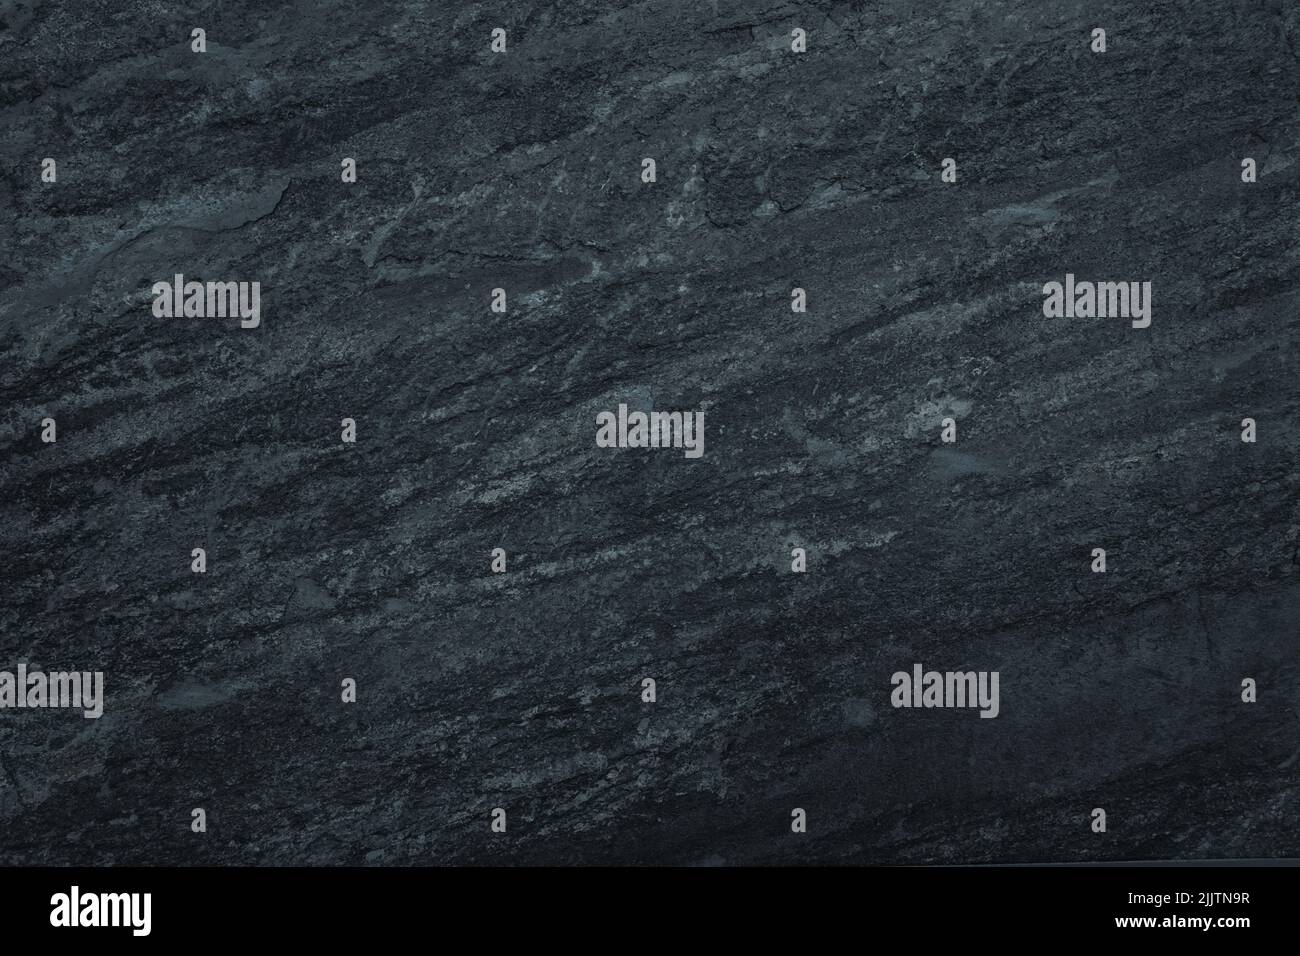 Gloomy black surface background. Abstract grunge rough peeled painted texture Stock Photo